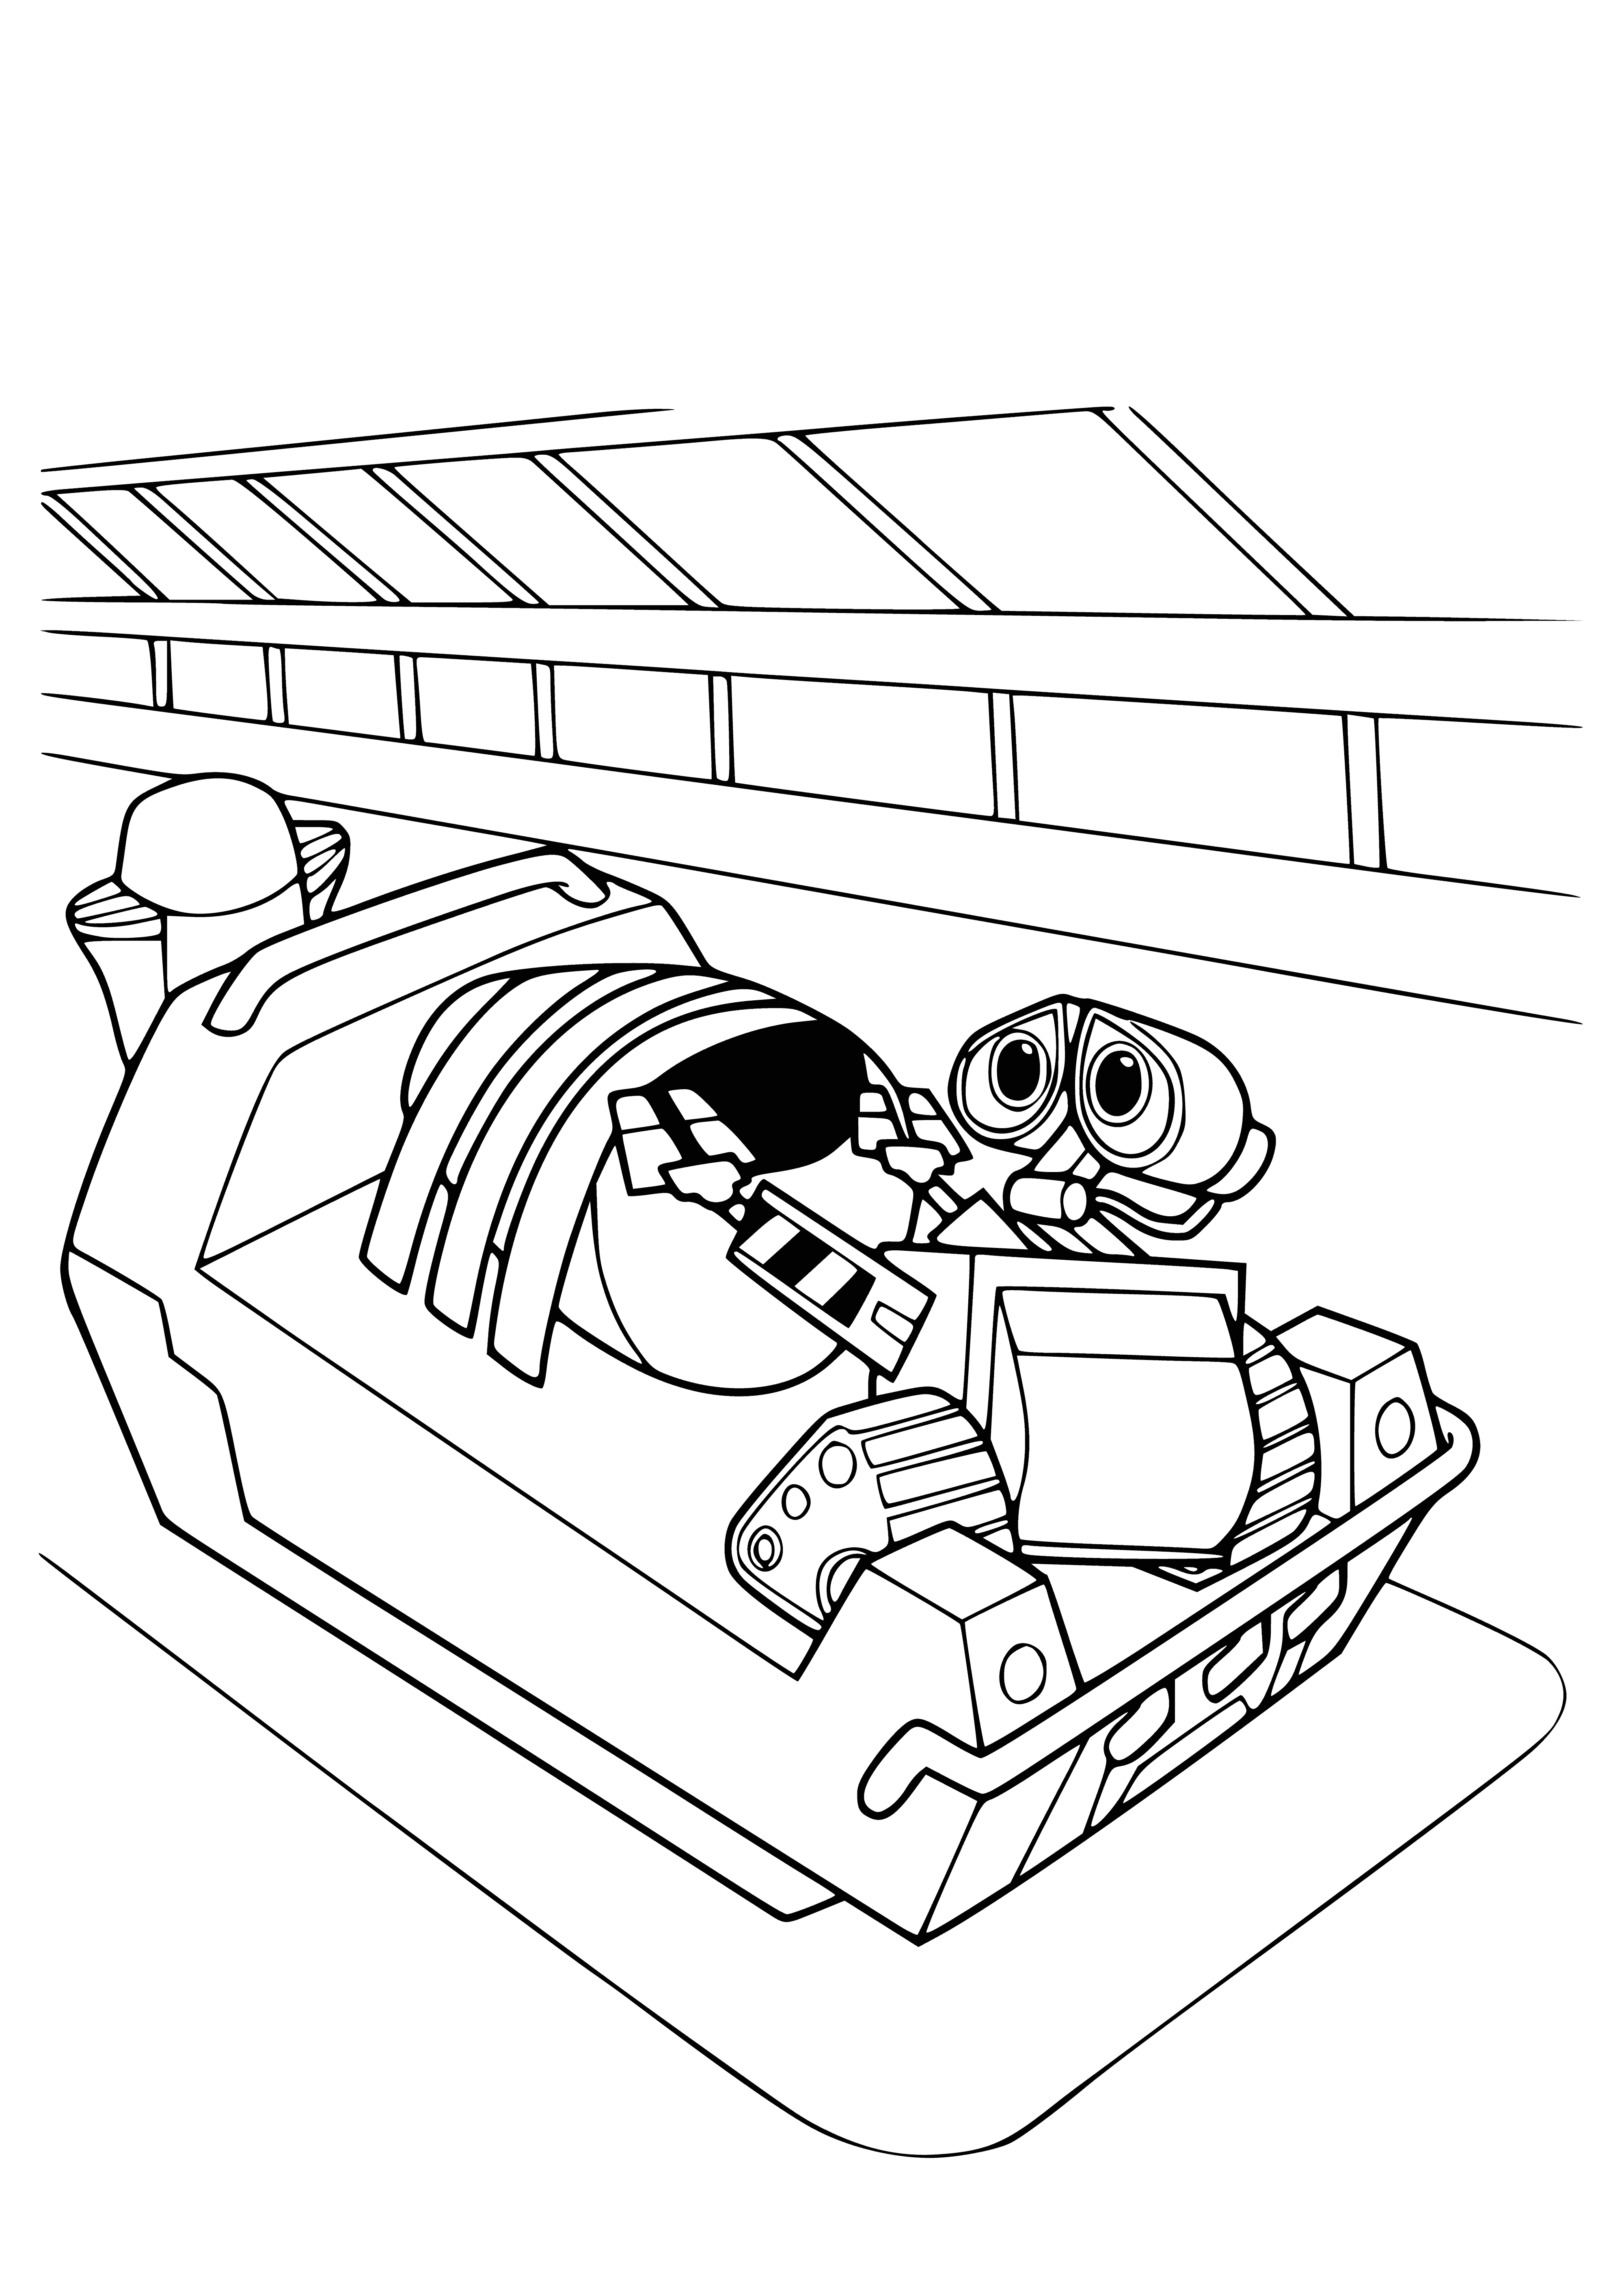 coloring page: Two robots explore planet, onboard blue spaceship. One reaching out to other with large, round eyes. #adventure